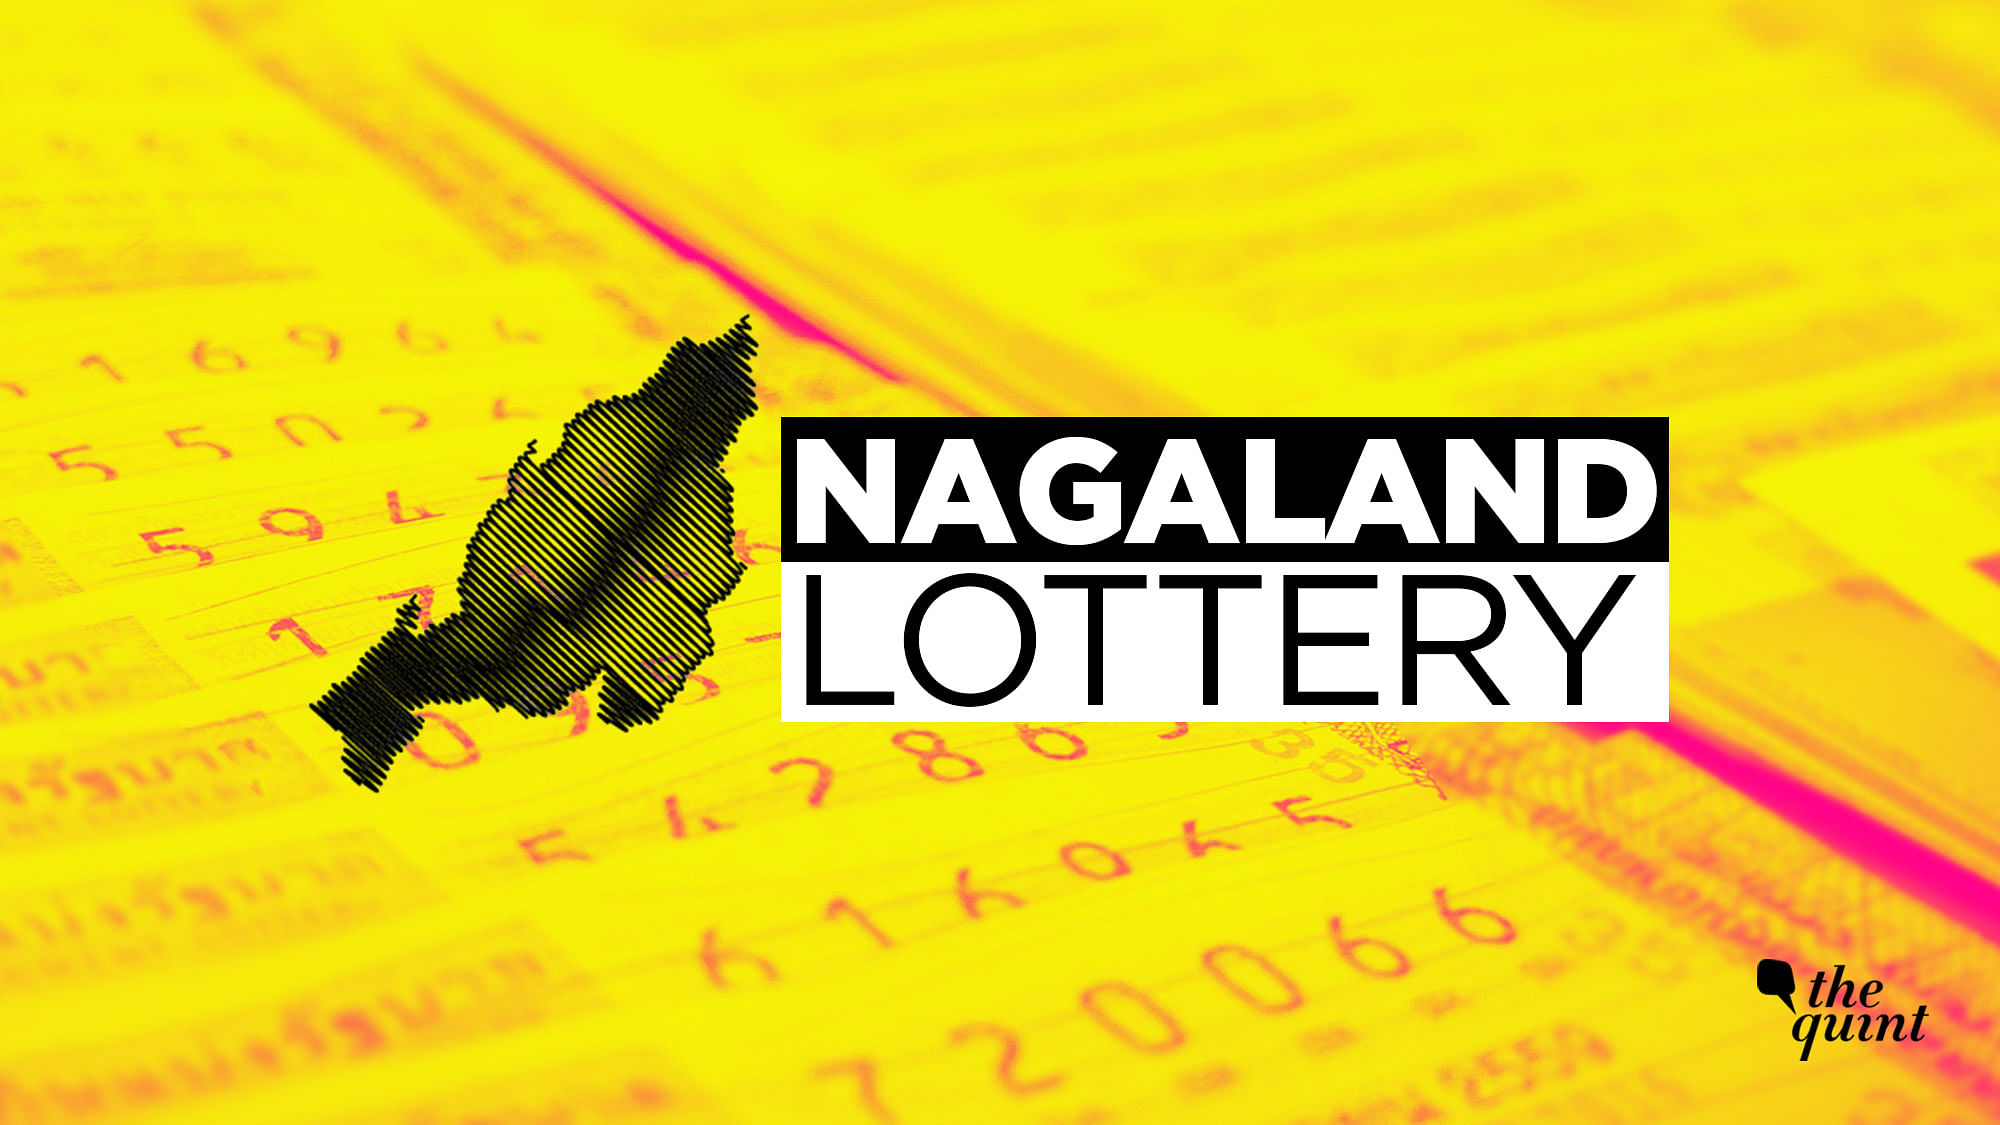 Nagaland Lottery Sambad: The first prize of the lottery is a sum of Rs 26 lakh, while the second prize is Rs 9,000. 